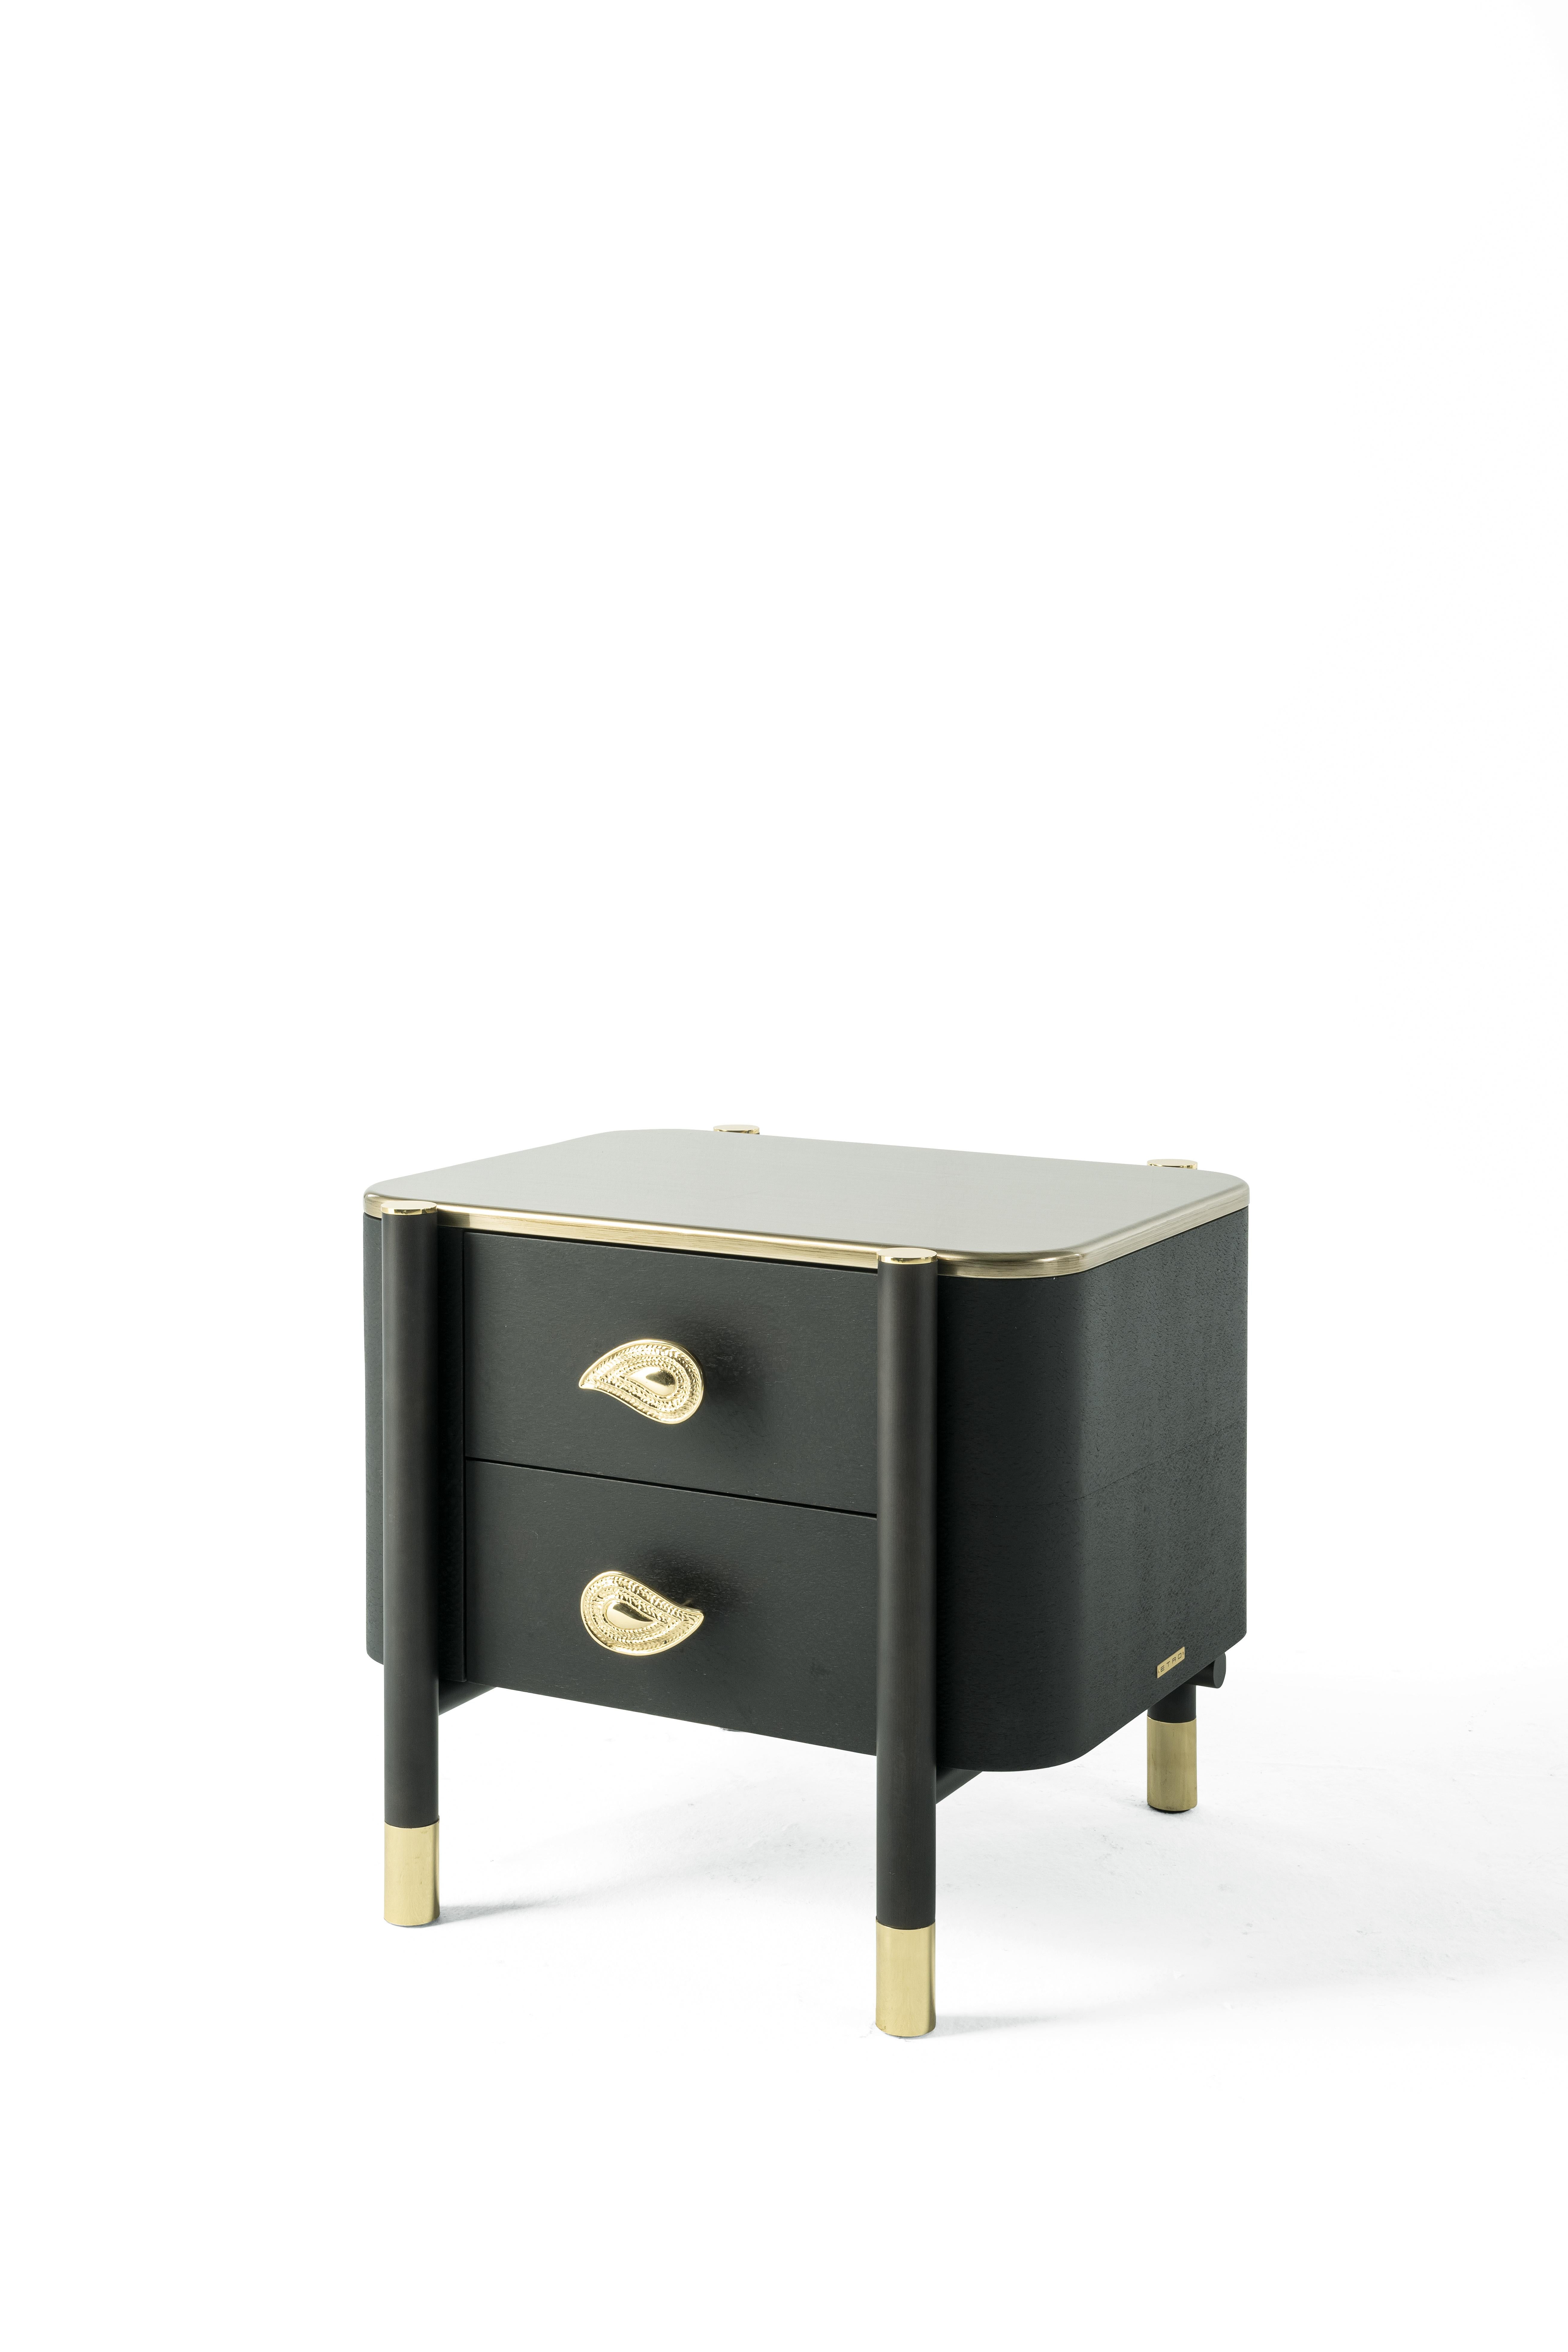 Characterized by a sophisticated dialogue between different materials, the night table of the Woodstock line is designed to meet functional and aesthetic
needs. The structure in dark wengé dyed wood with tips in polished brass reflects the style of